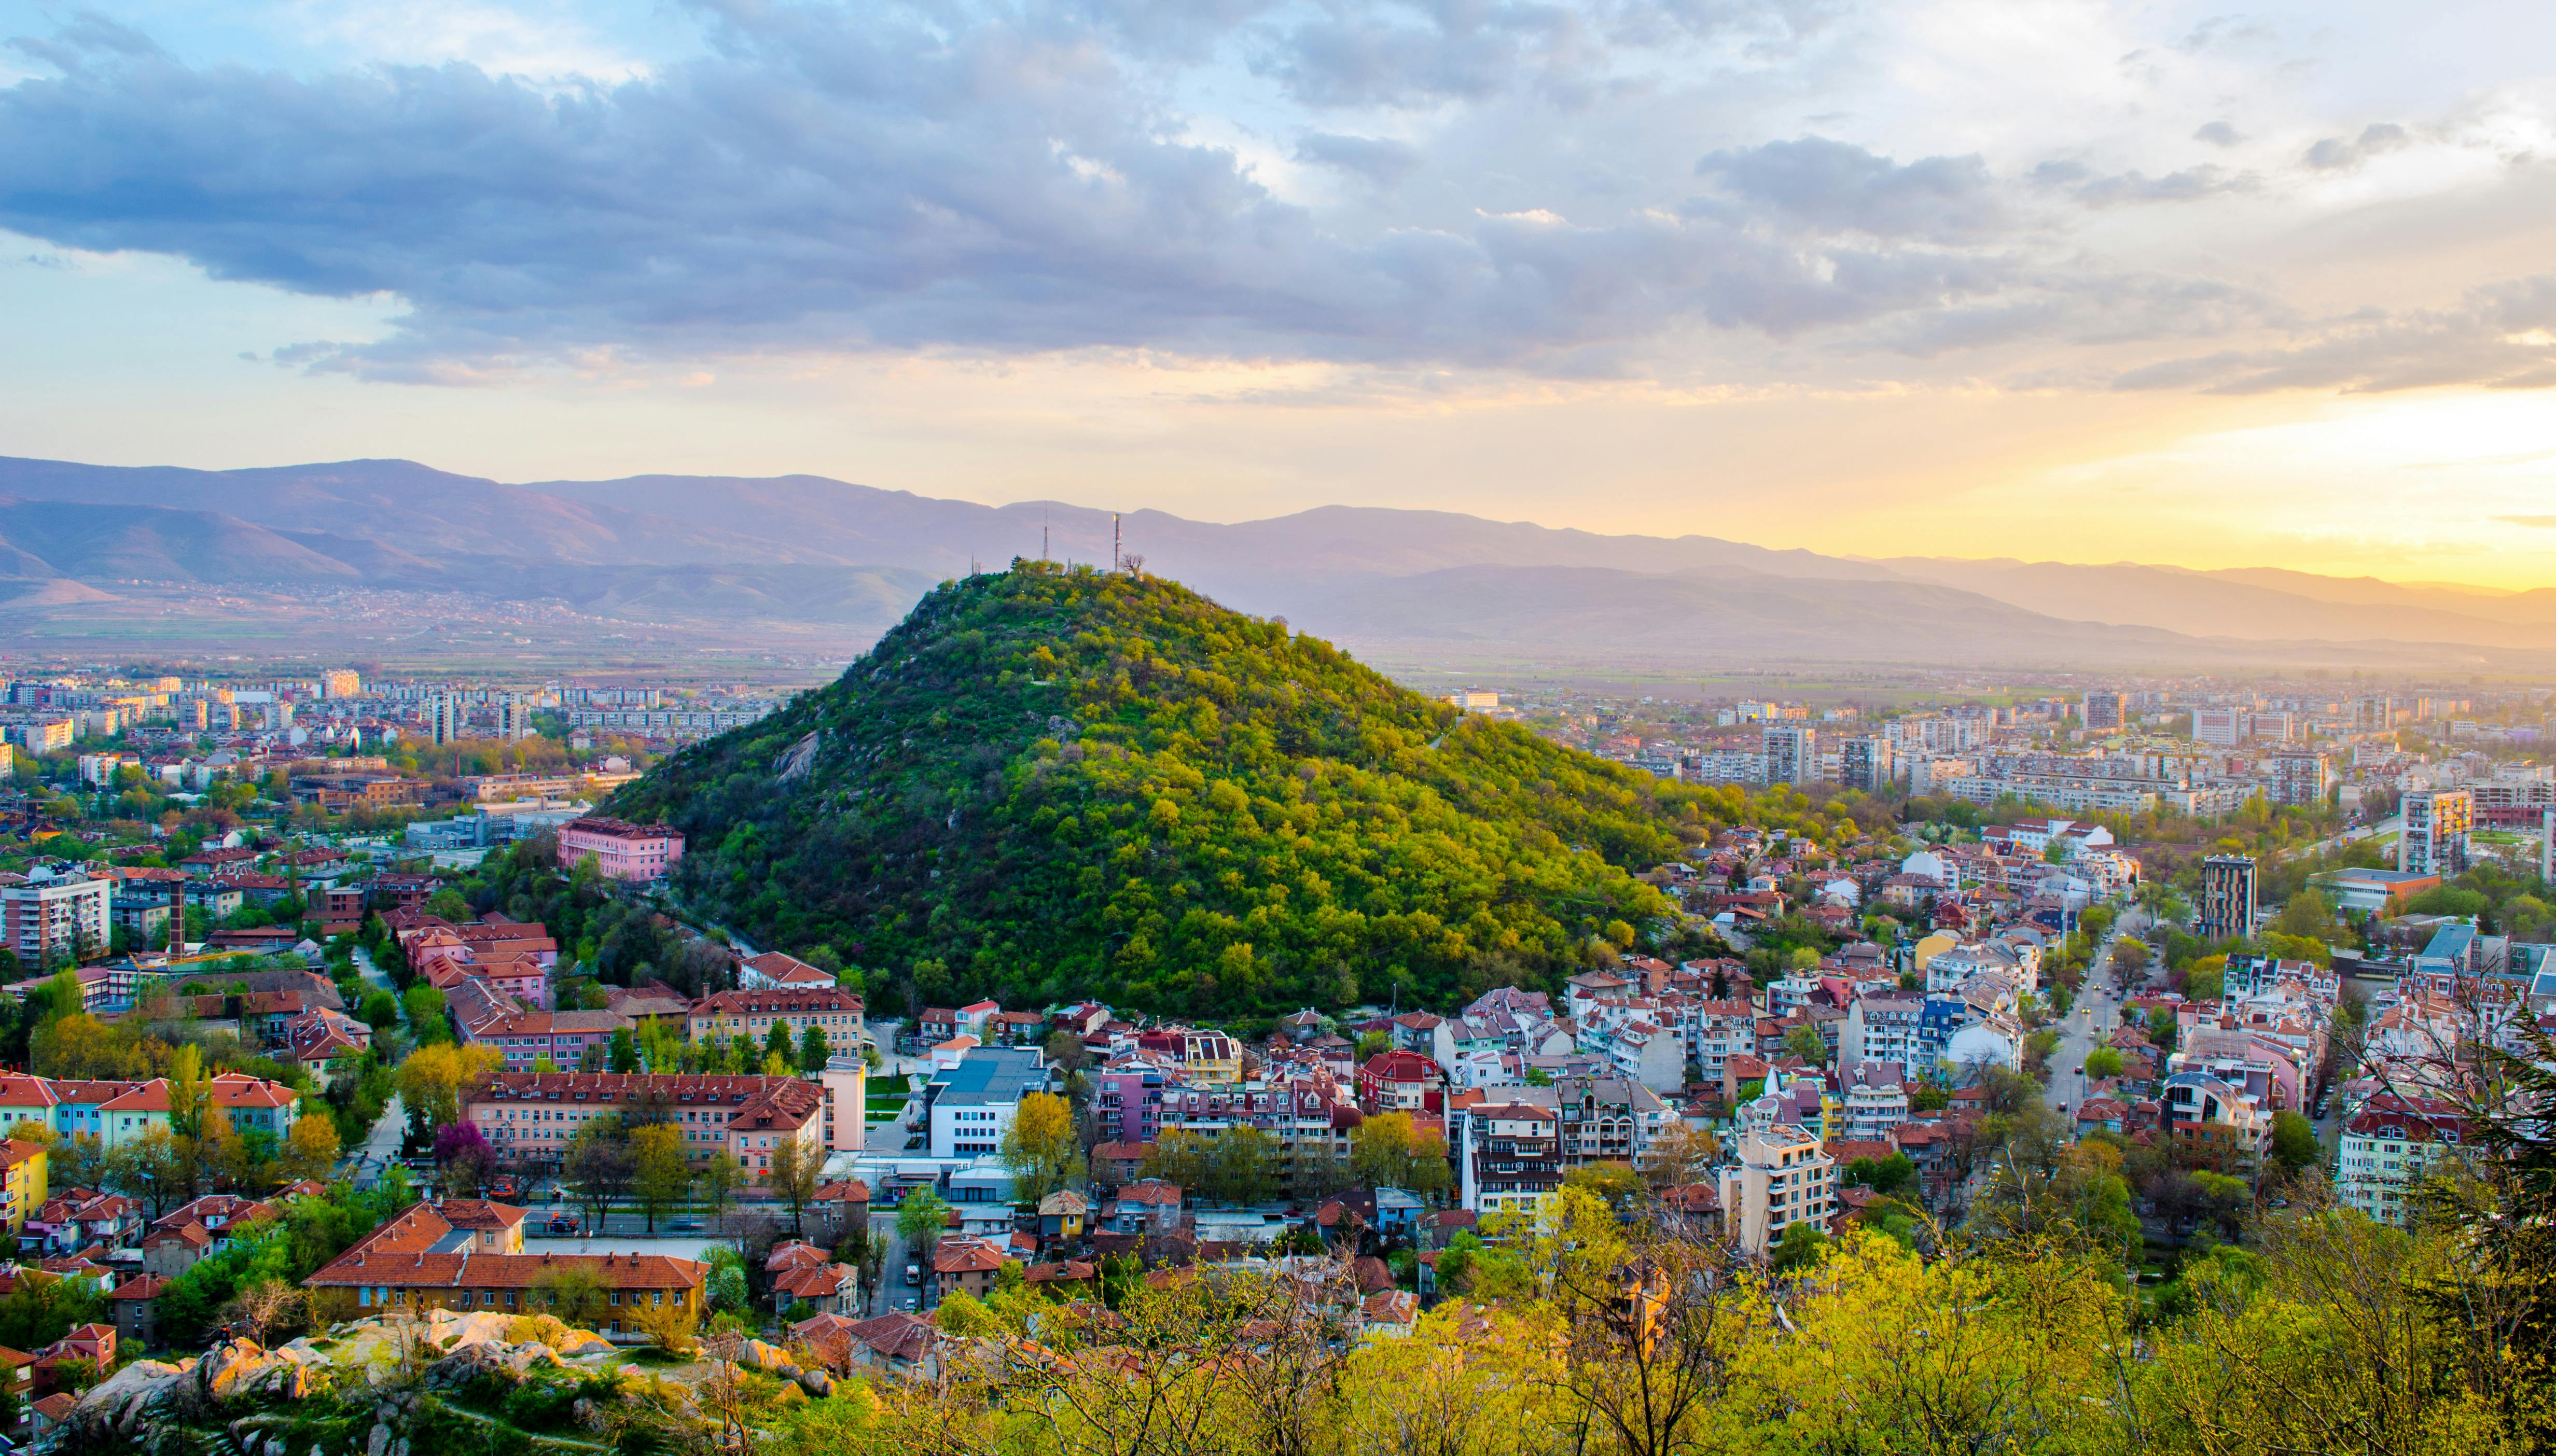 Seven Hills of Plovdiv guided tour